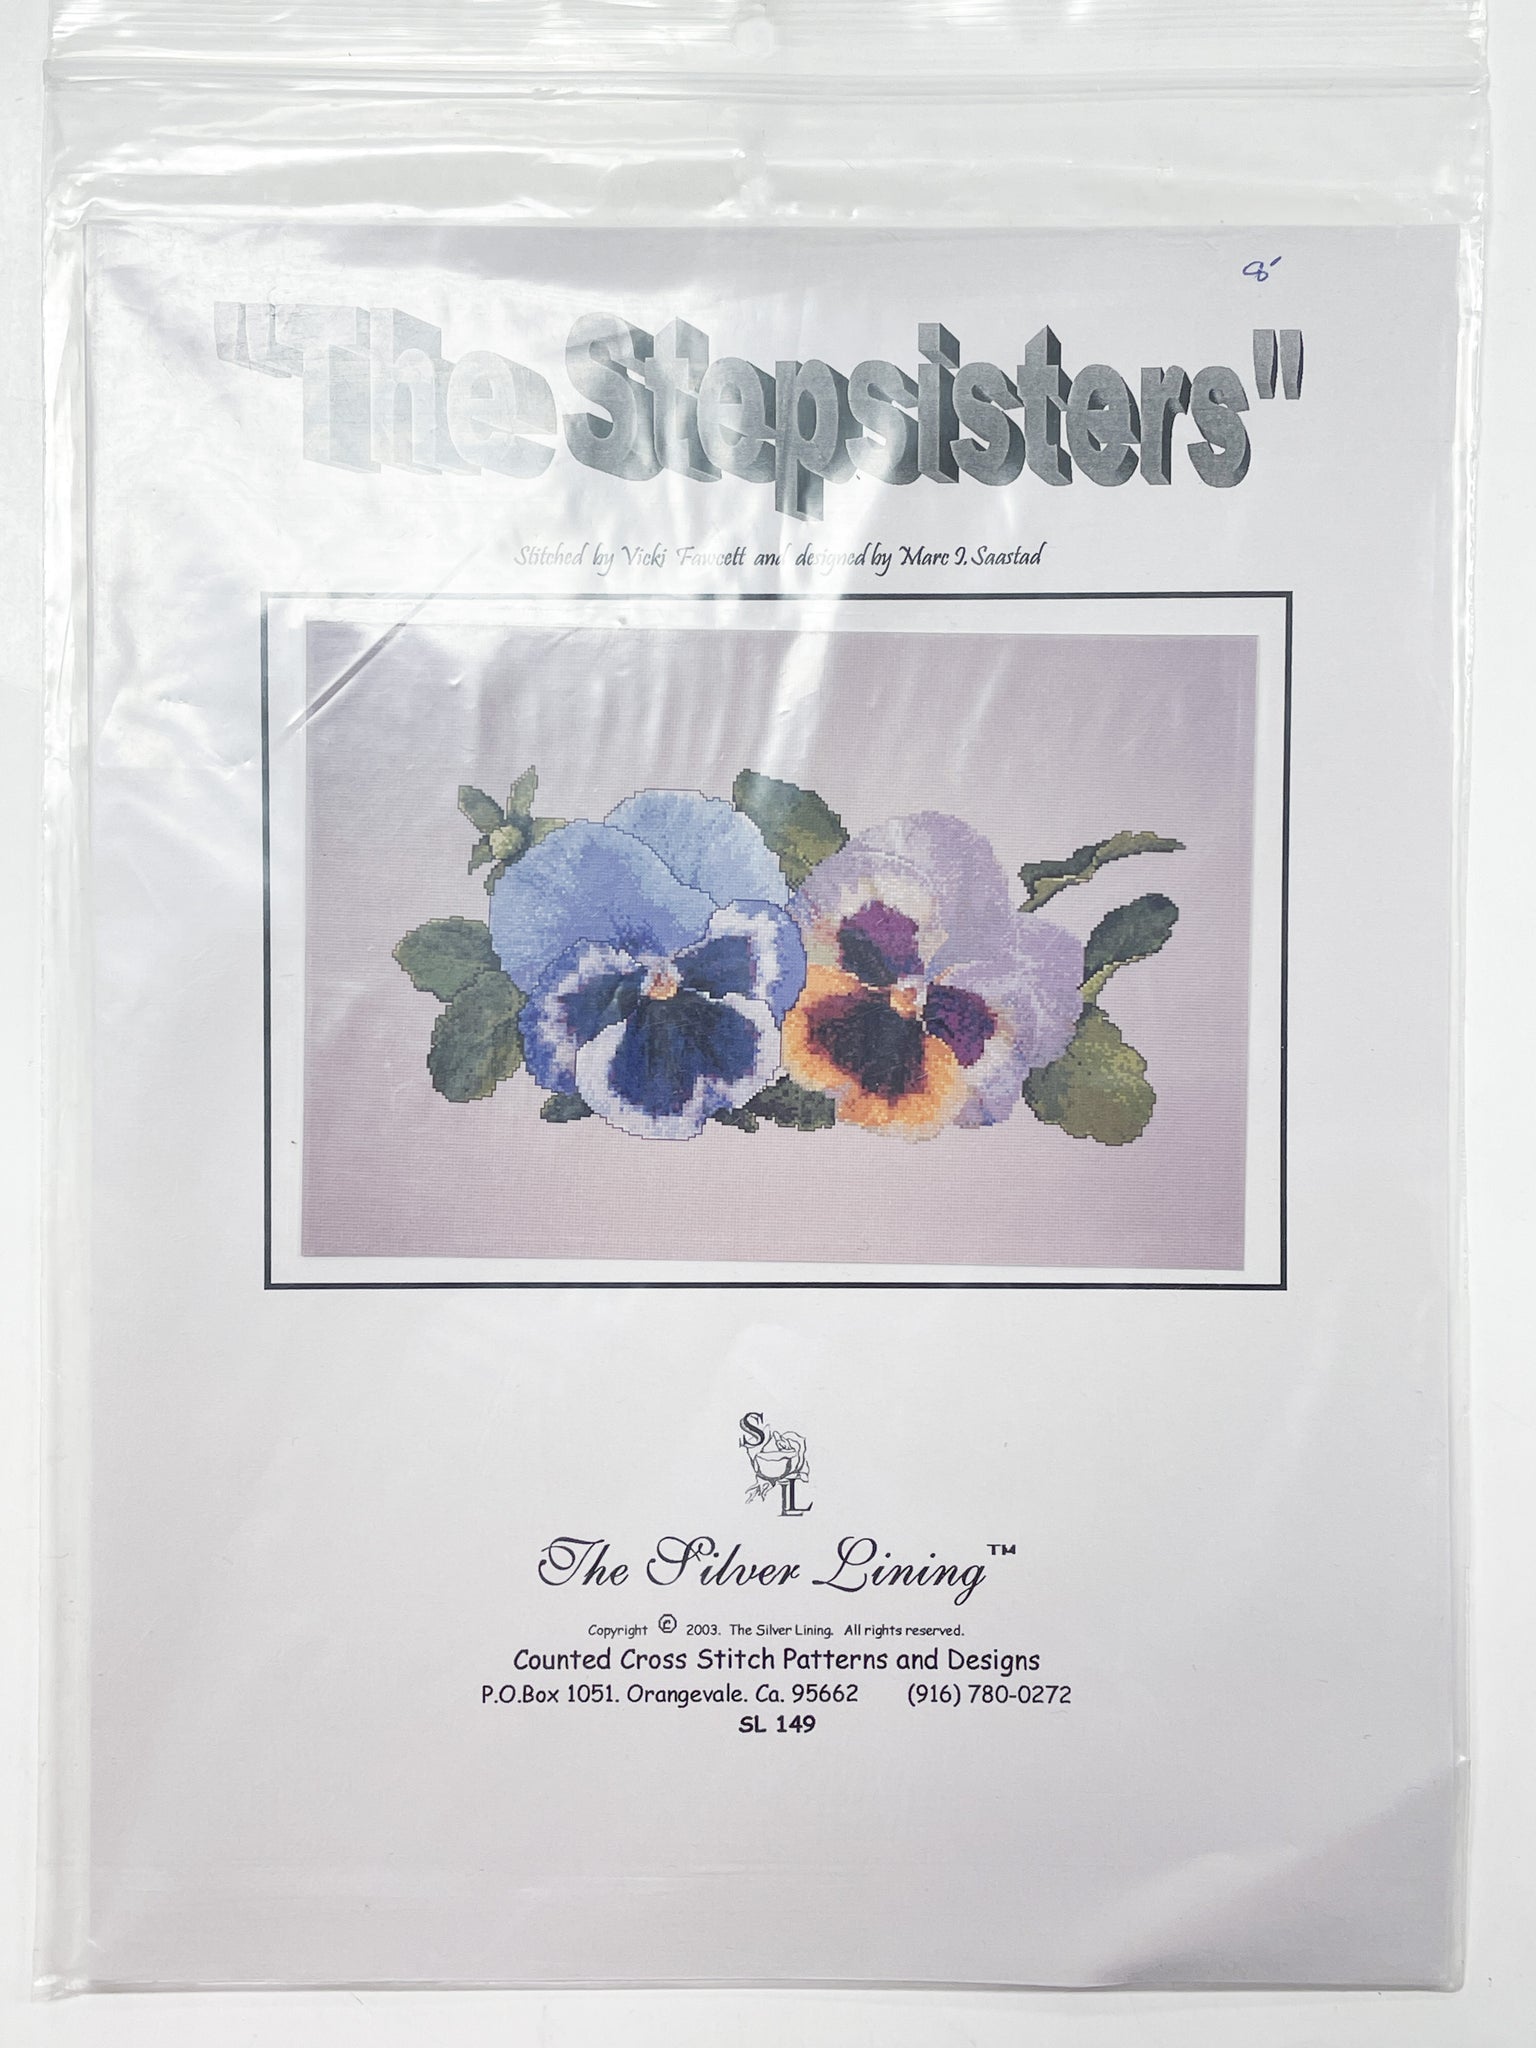 2003 Cross Stitch Pattern - Pansies "The Stepsisters"